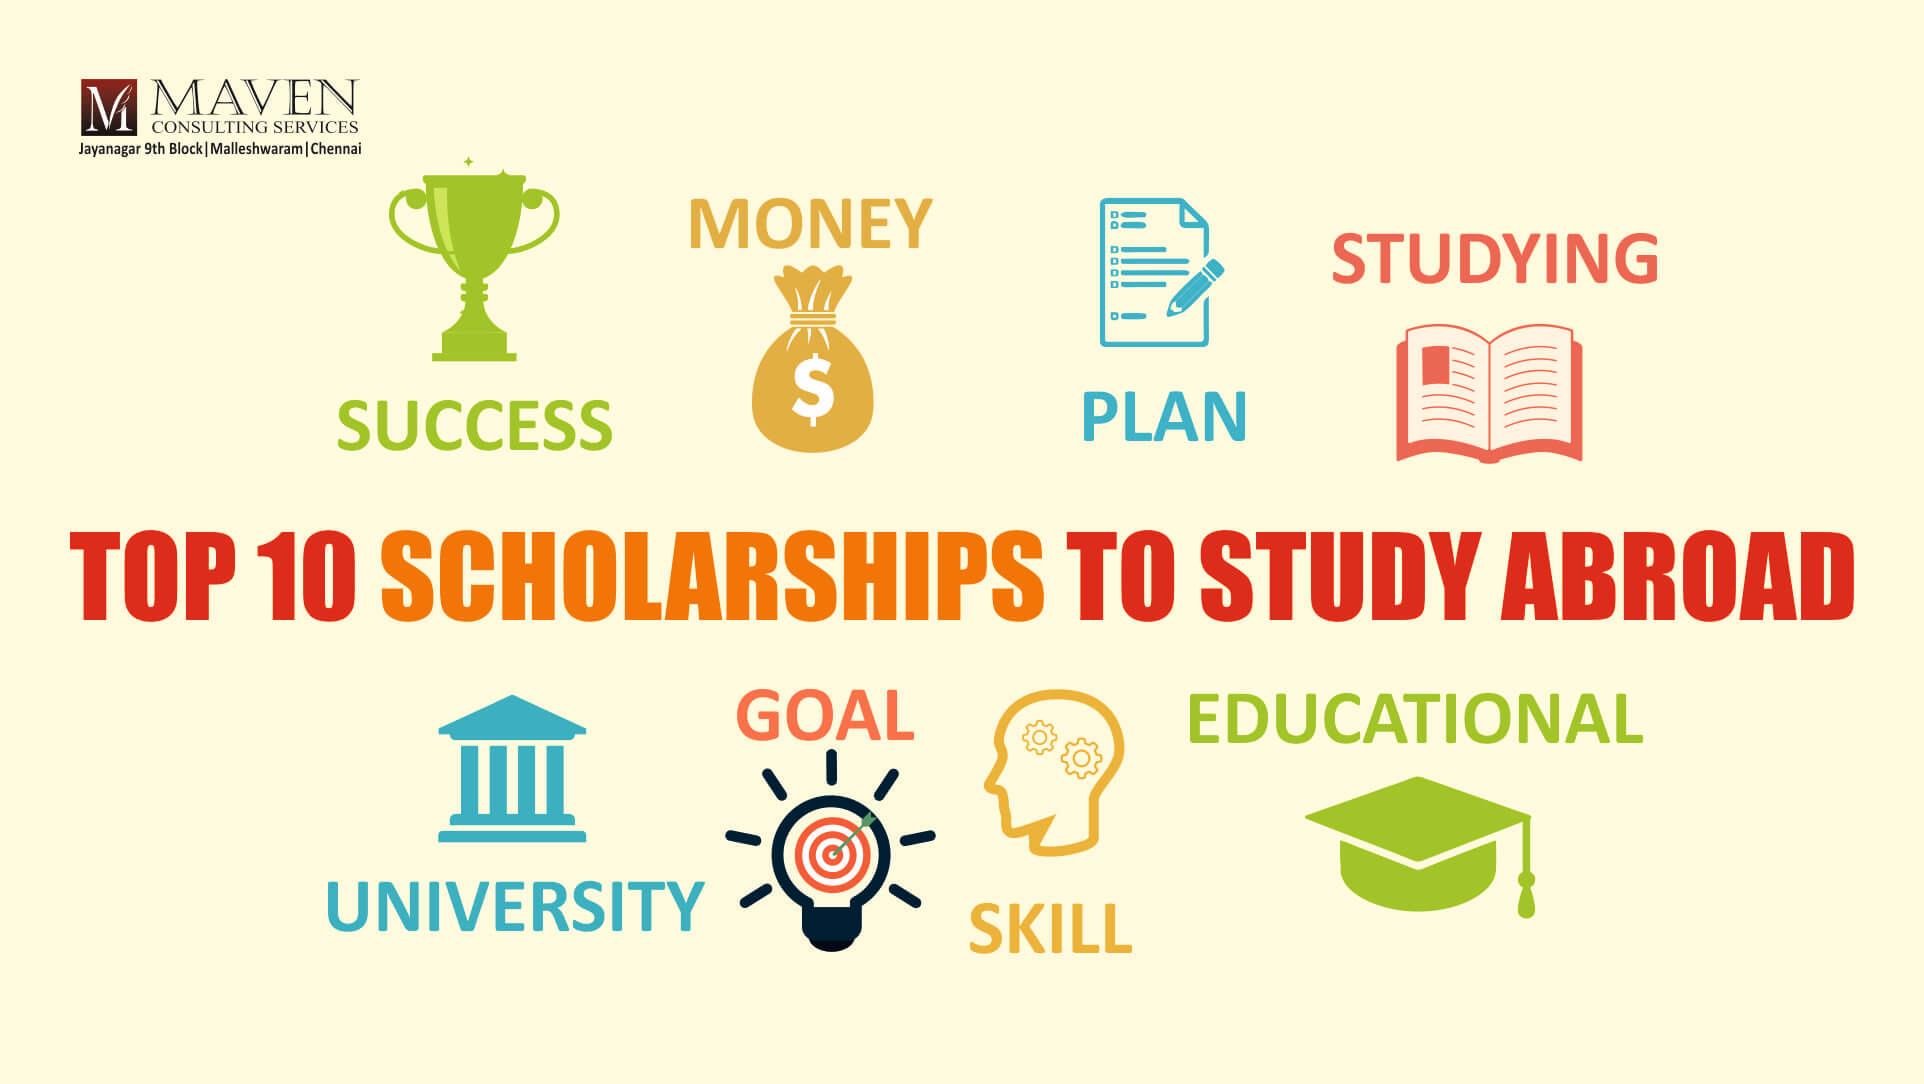 Top 10 Scholarships To Study Abroad Maven Consulting Services